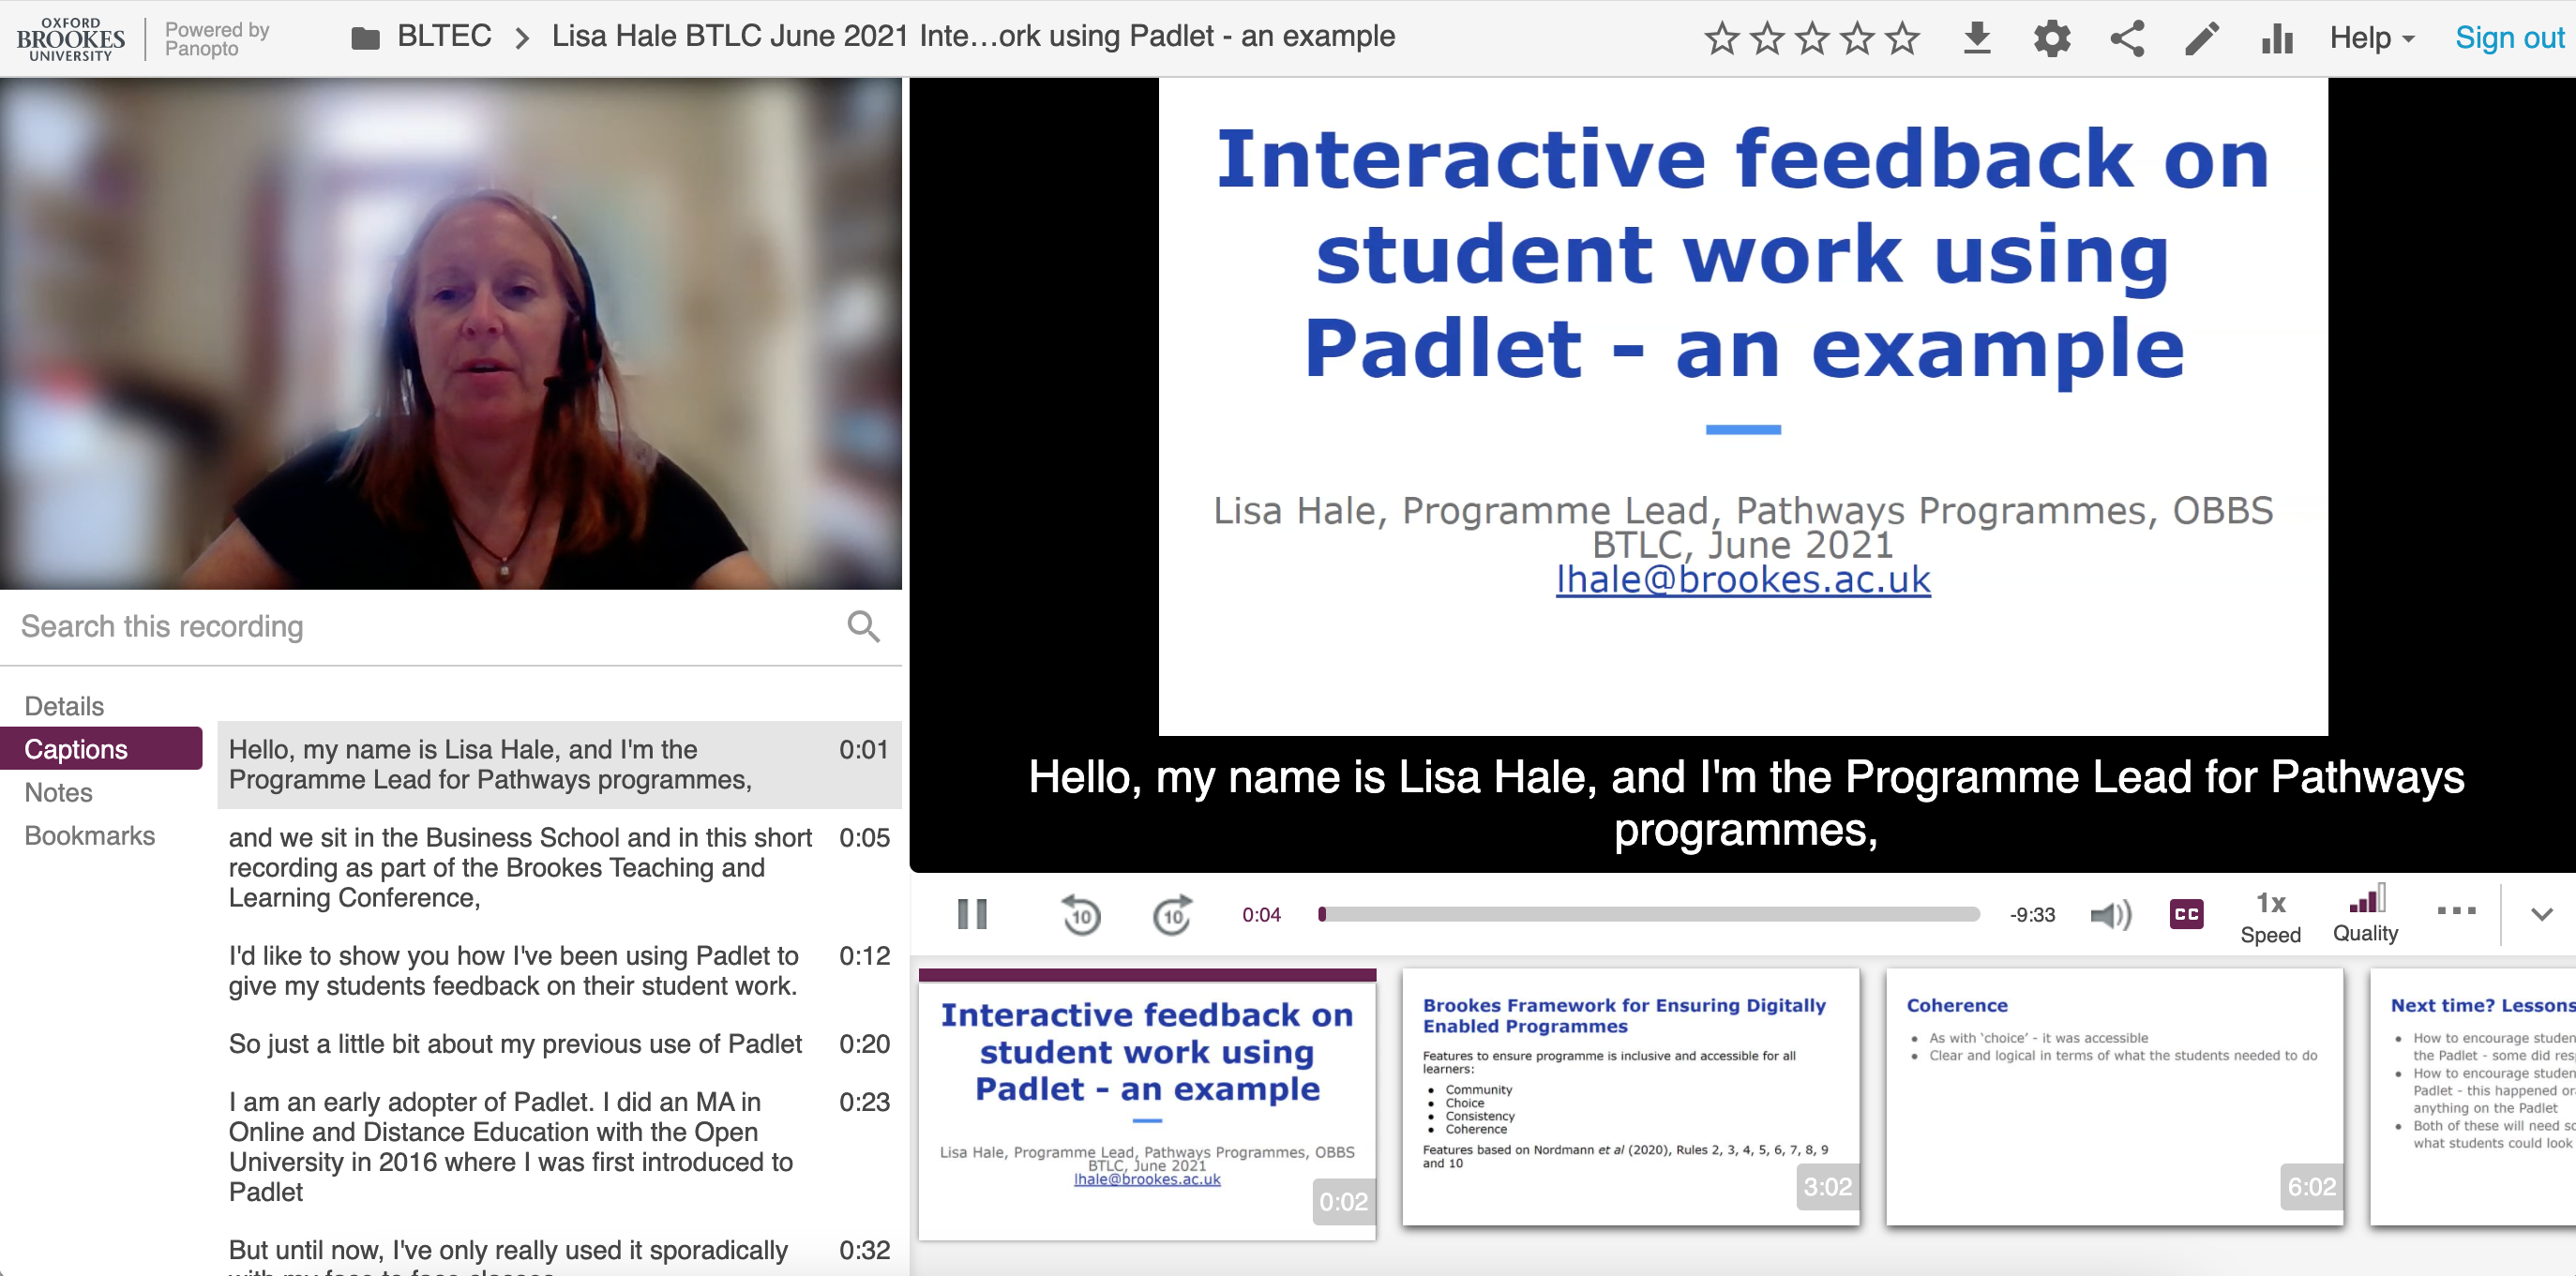 Video still from Interactive feedback on student work using Padlet